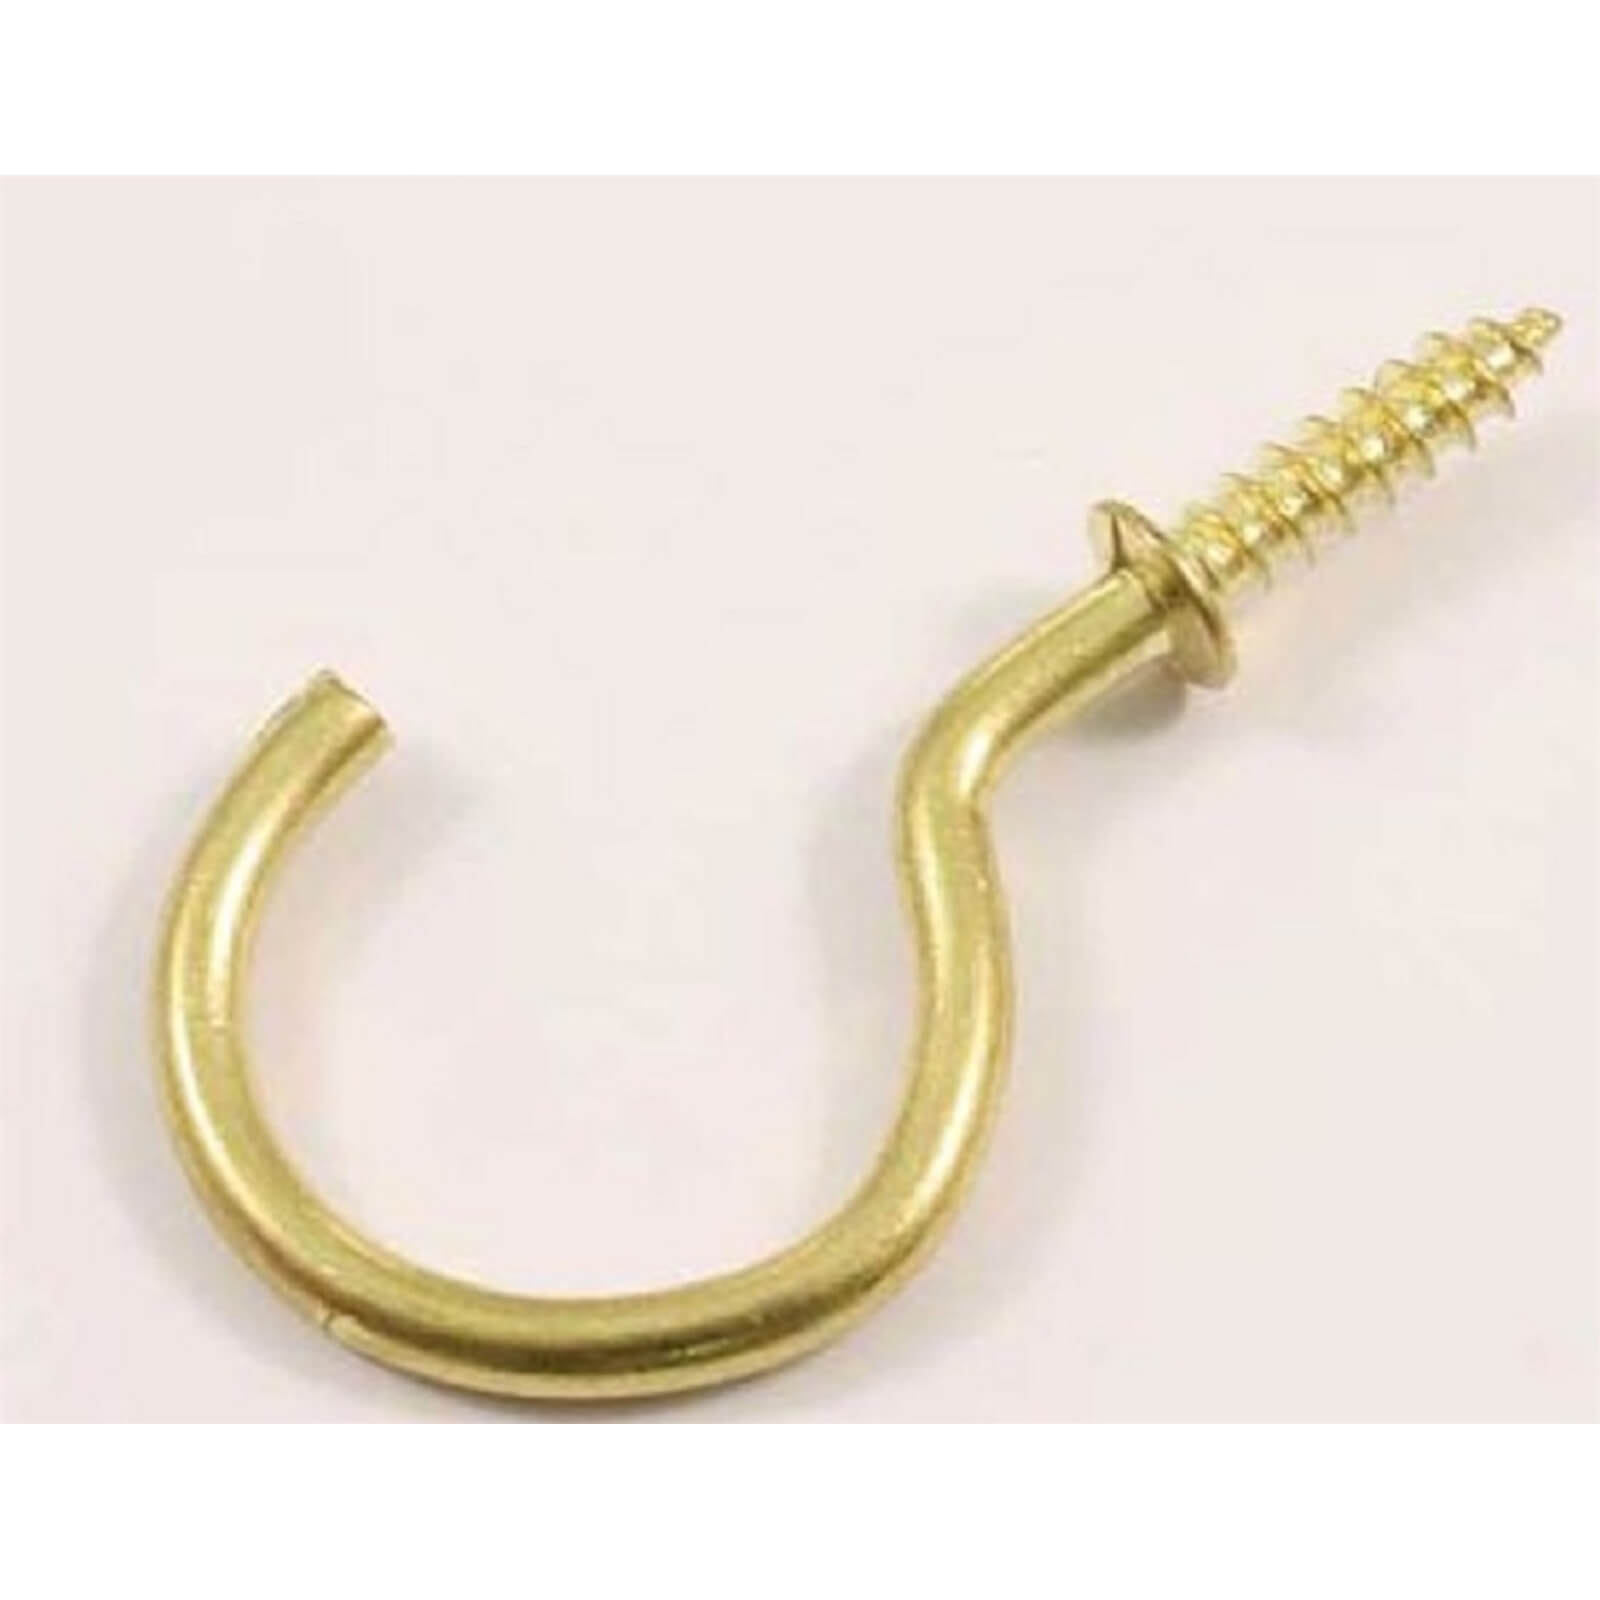 Photo of Round Cup Hook - Brass - 38mm - 3 Pack